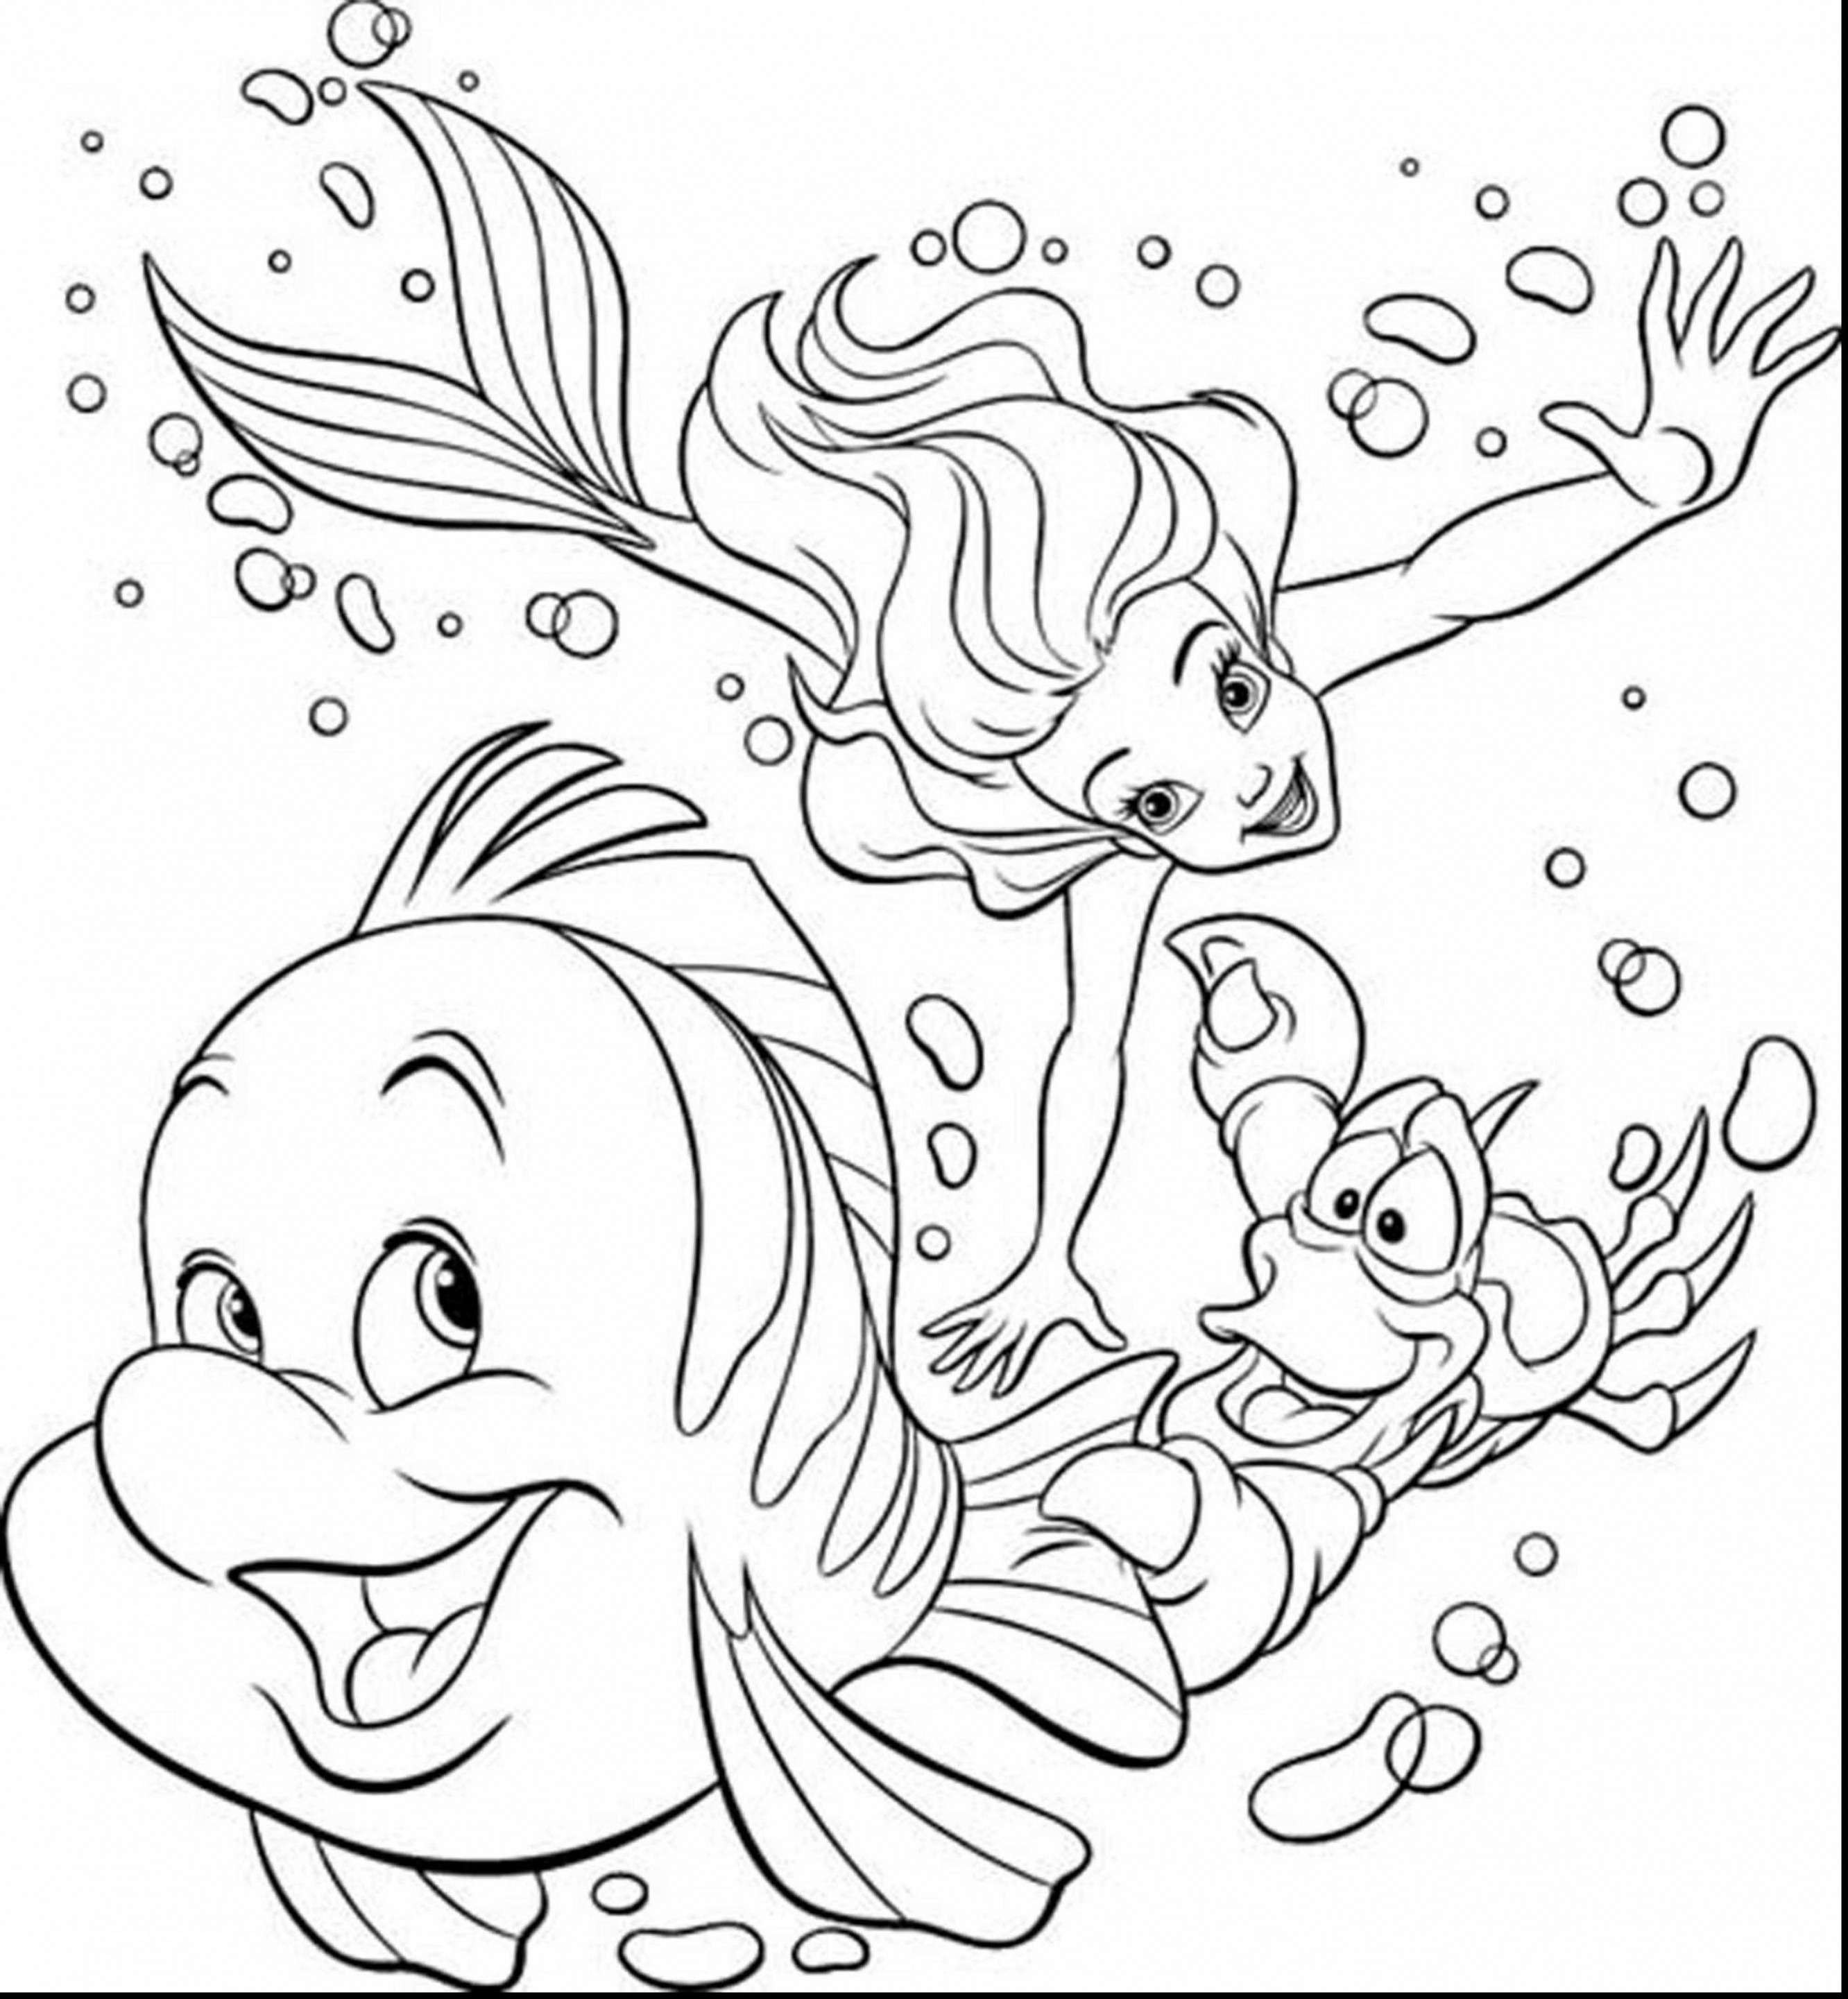 Frozen Princess Coloring Pages Printable Elegant Fresh Chuggington Coloring Pages Free Printabl Pin Od Tracy –